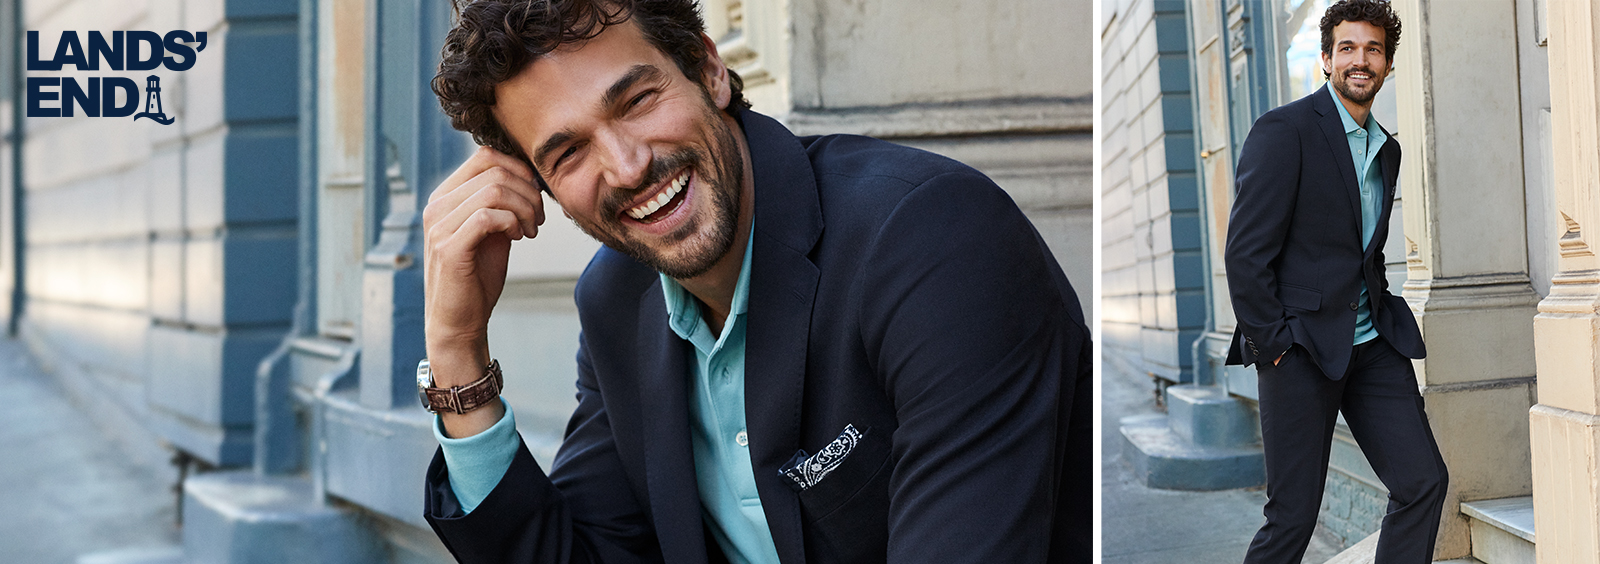 Blazer Vs. Suit Jacket â€” What'S The Difference? | Lands' End